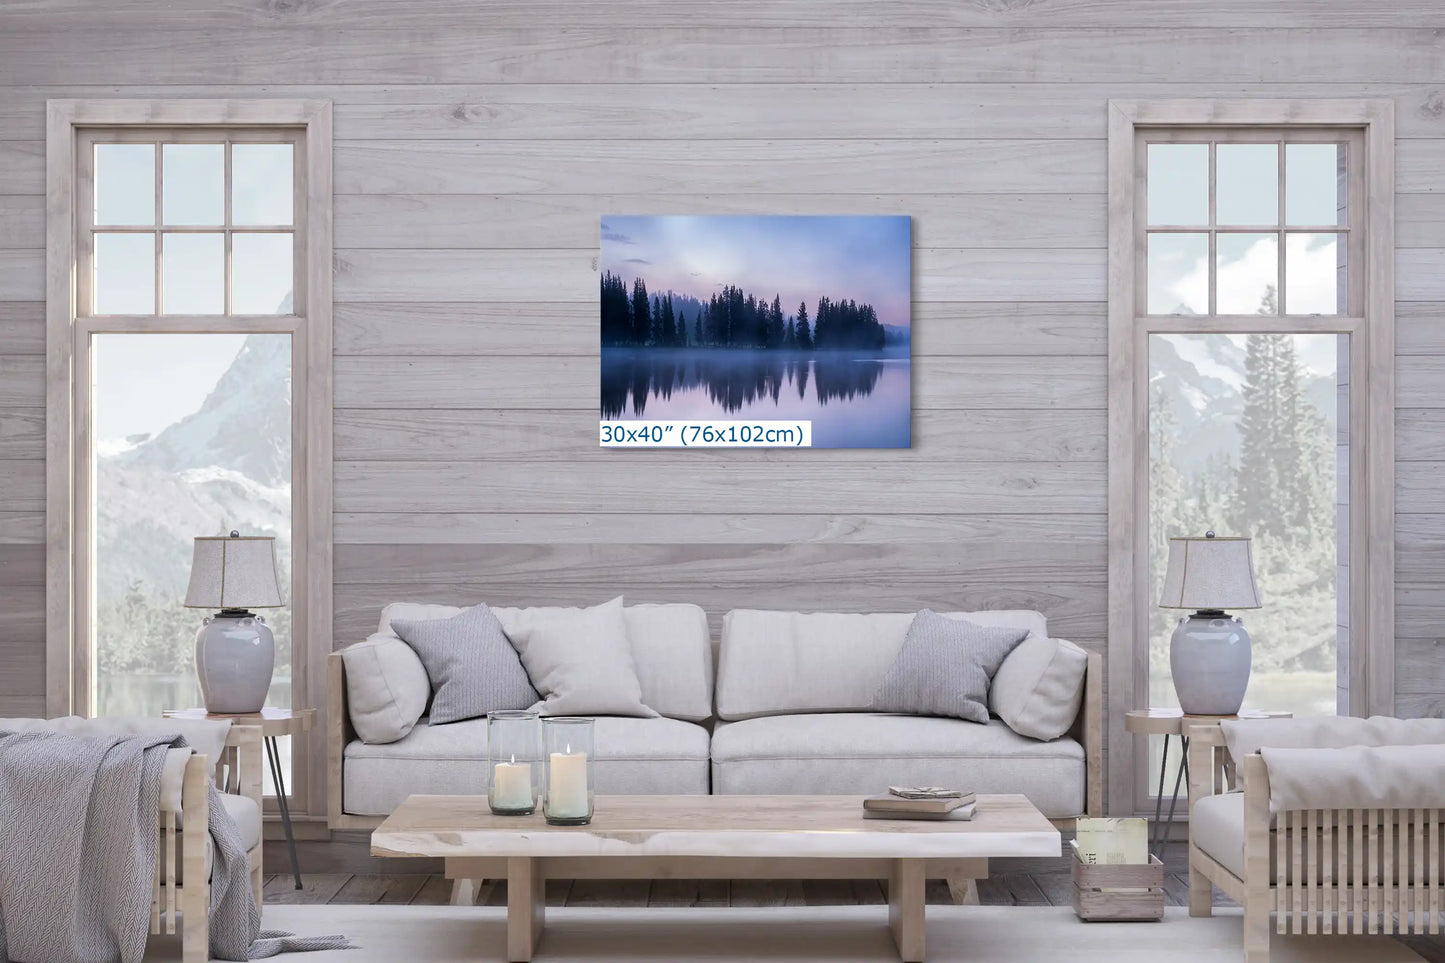 Large 30x40 wall art print of a tranquil twilight reflection scene at Yellowstone Lake, centered over a sofa, serving as a living room's focal point.